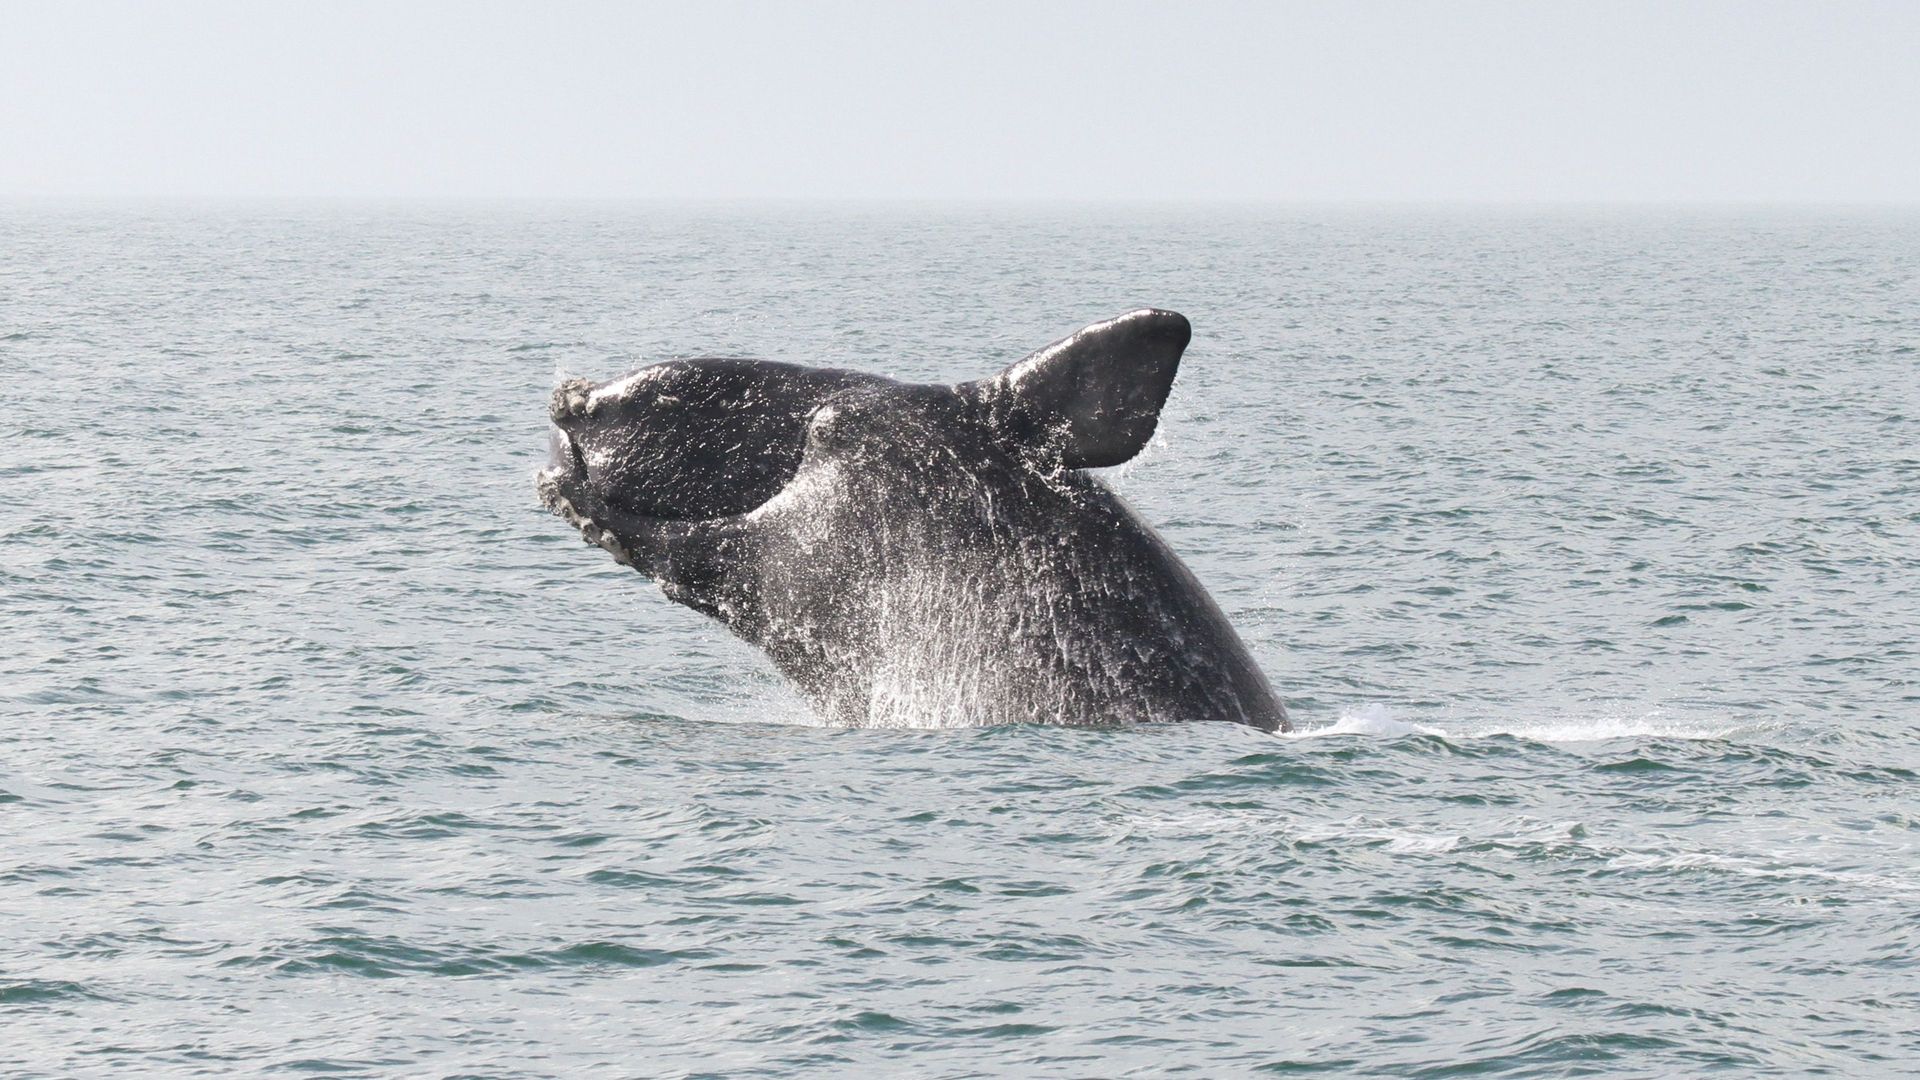 An endangered right whale breaches on a sunny day off the coast of Georgia